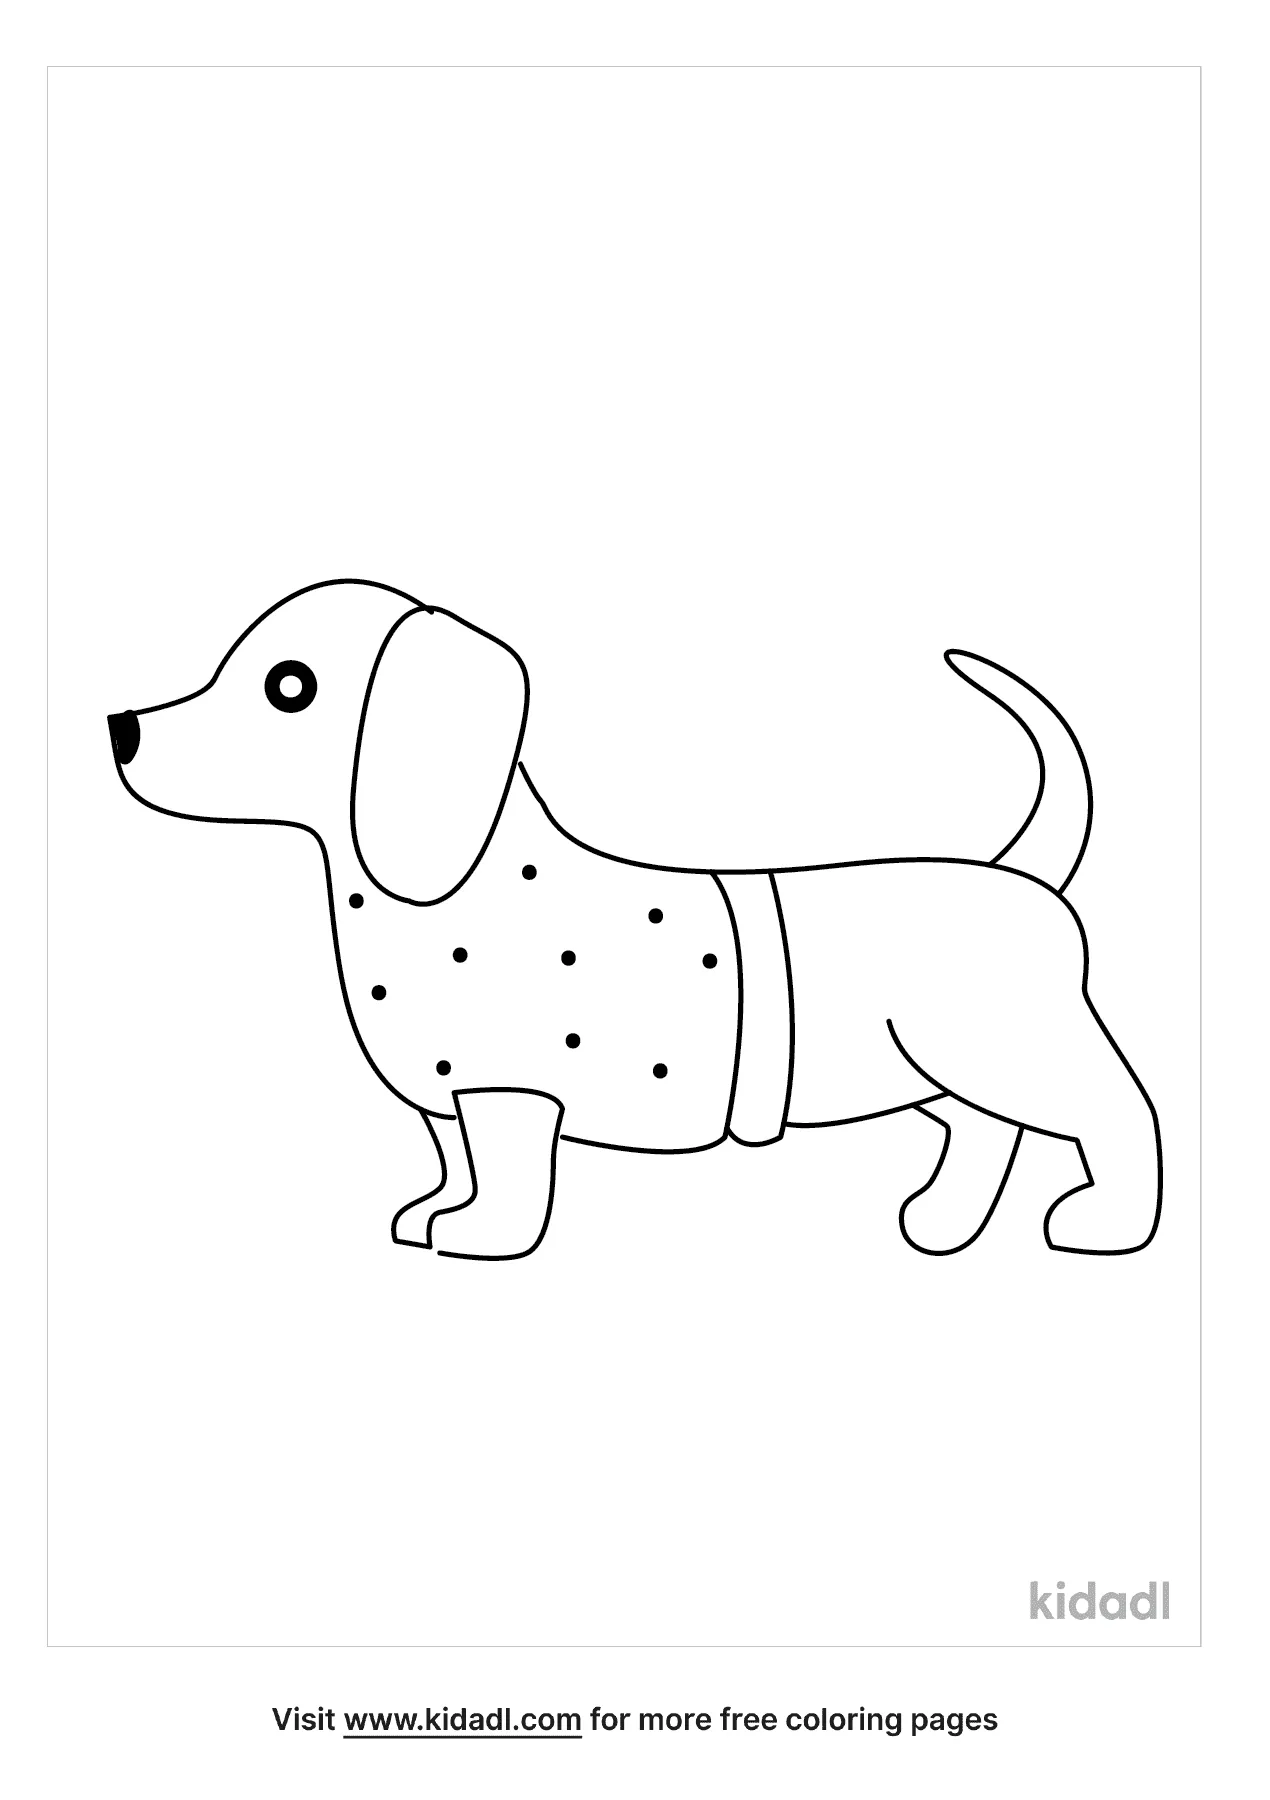 easy puppy coloring pages